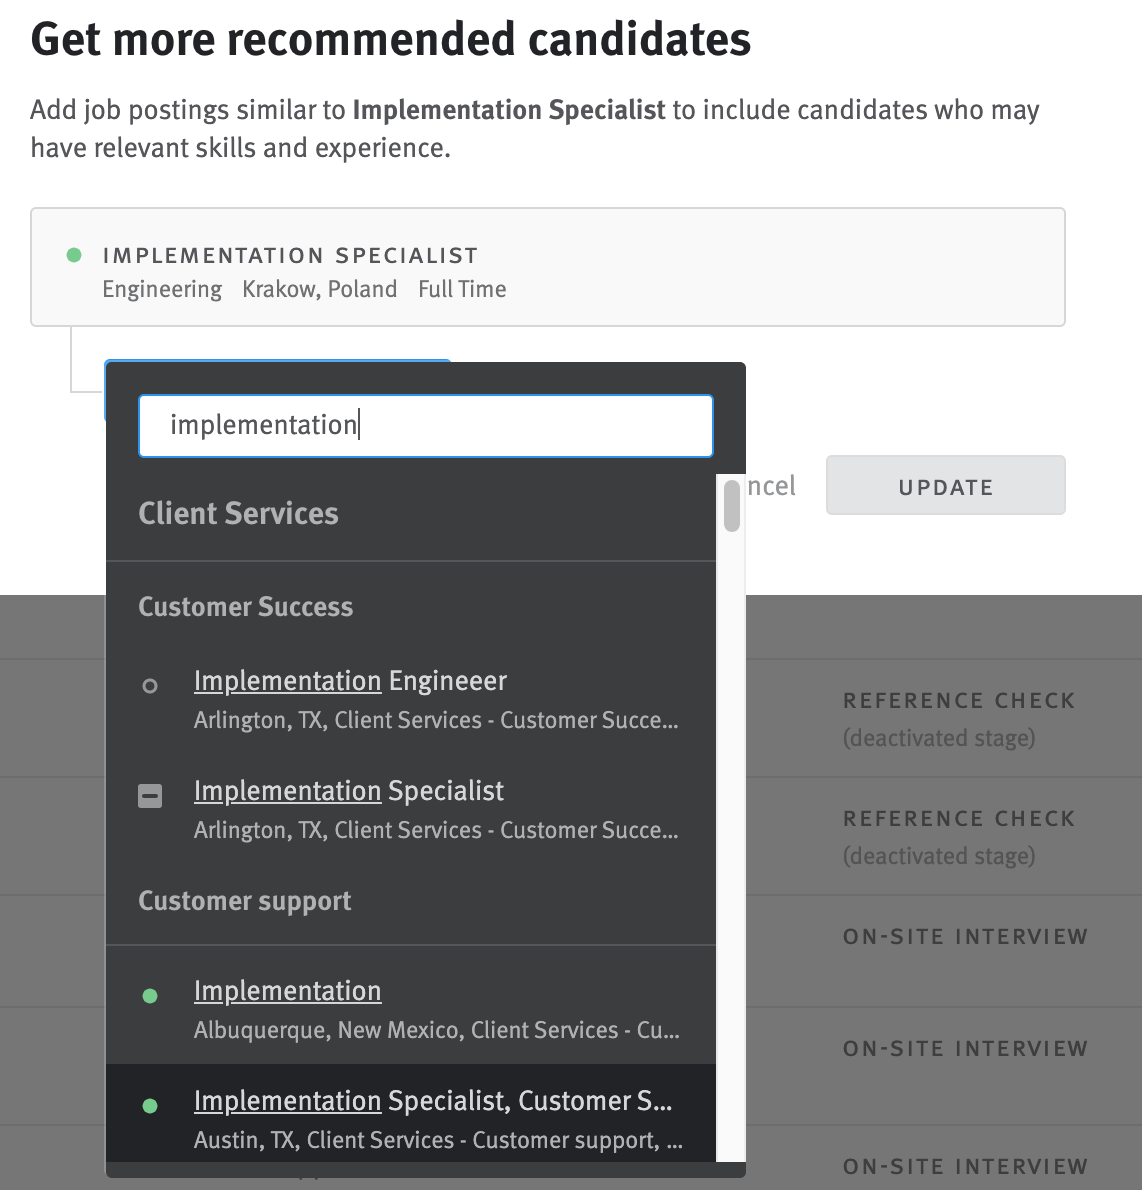 Get more recommended candidates modal with dropdown list of job postings